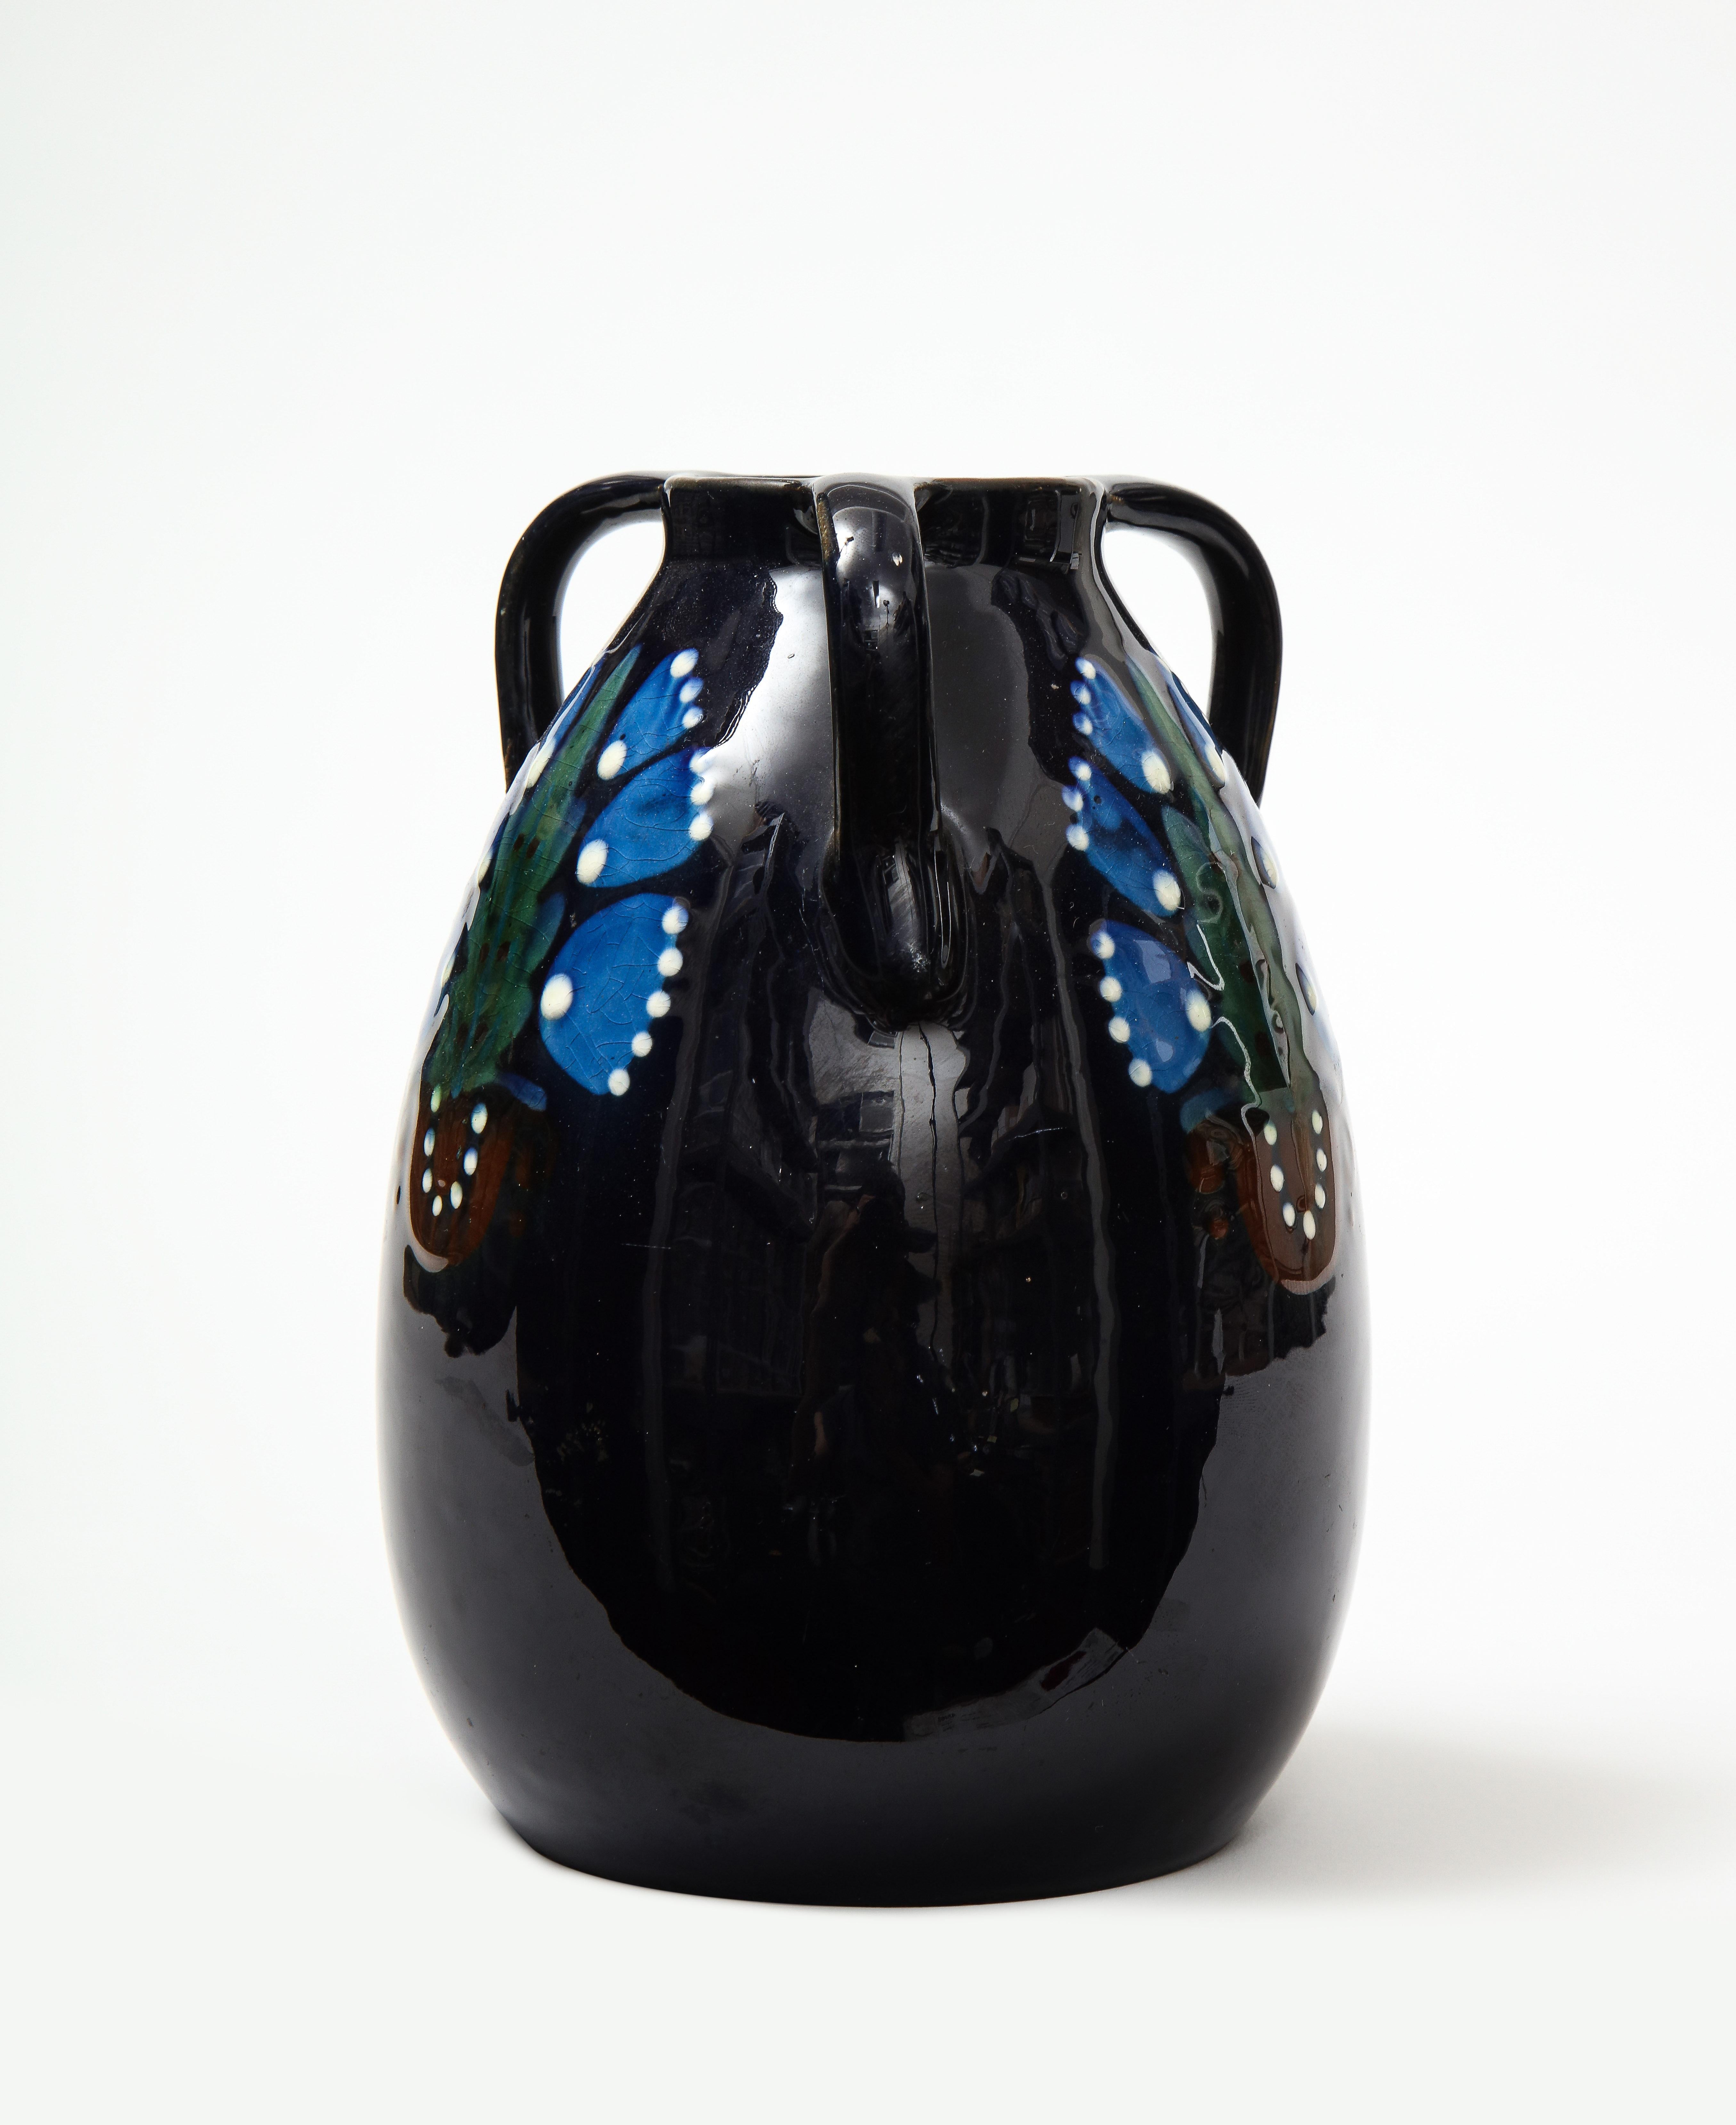 Ceramic vase by acclaimed architect and artist Max Laeuger, Germany, c. 1920s. 

This charming vase consists of a delightful, hand-painted floral motif typical of the Art Nouveau period set against a dark blue backdrop as well as three individual